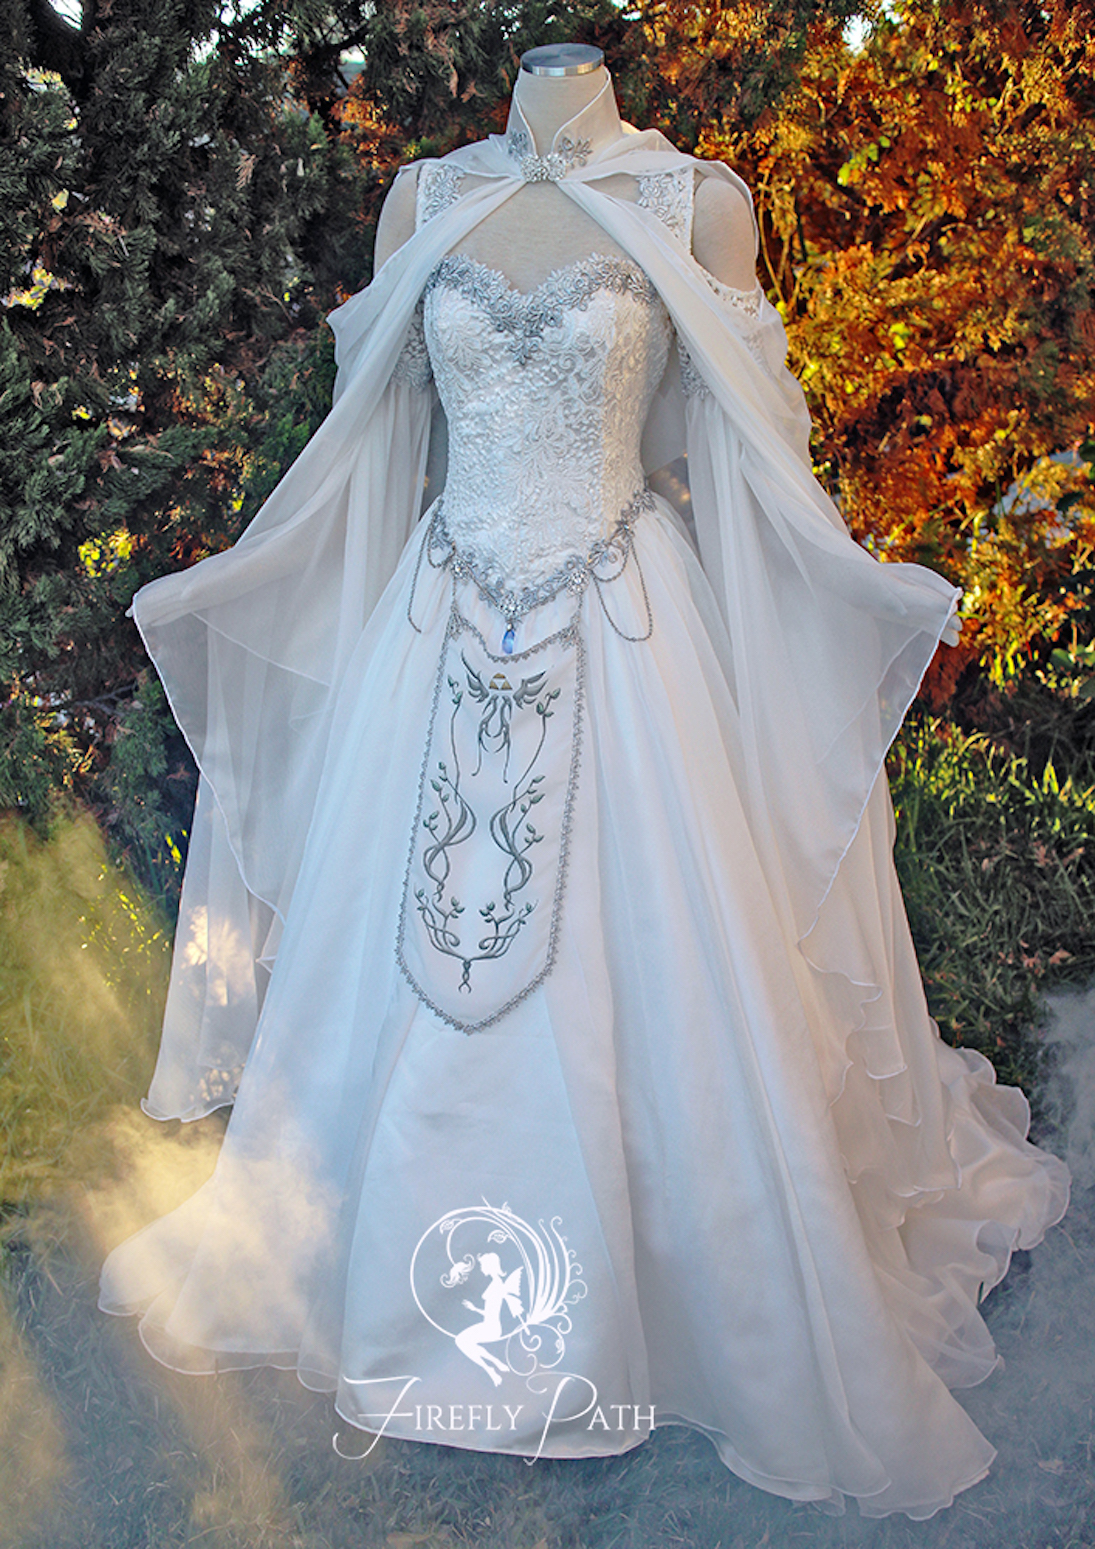 Zelda Inspired Wedding Dress Will Have You Saying 'I Do' - Project-Nerd